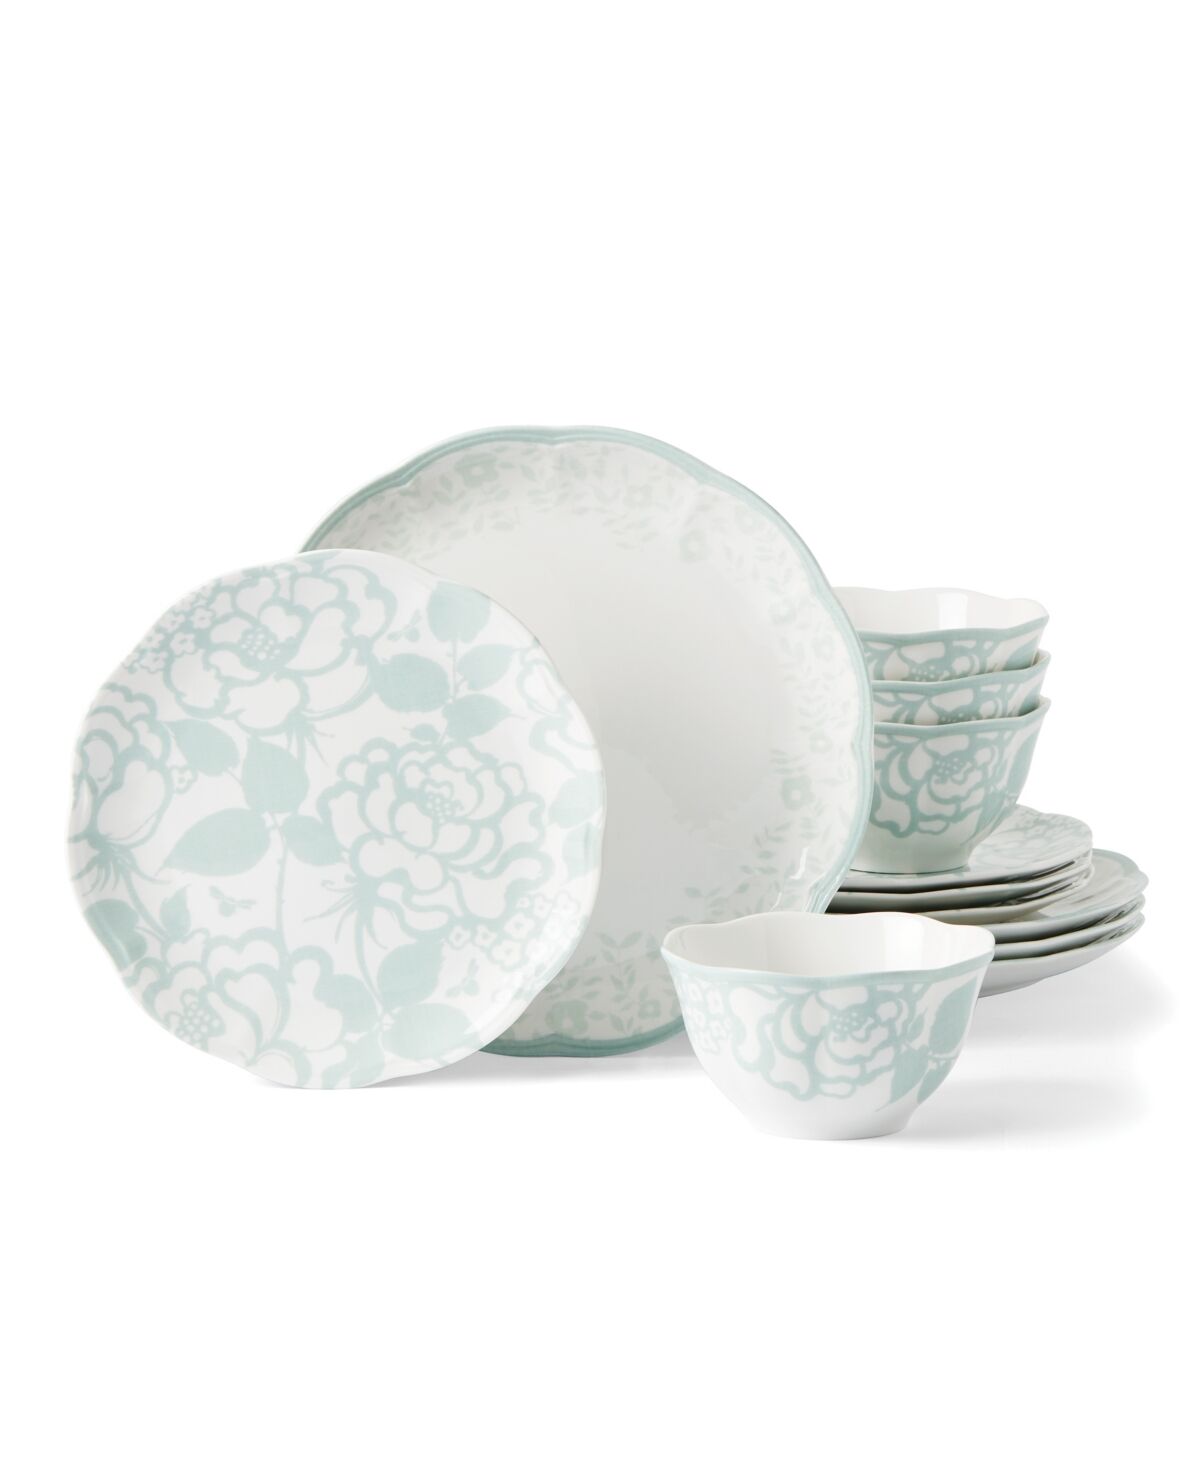 Lenox Butterfly Meadow Cottage 12 Pc. Dinnerware Set, Service for 4 - sage hue